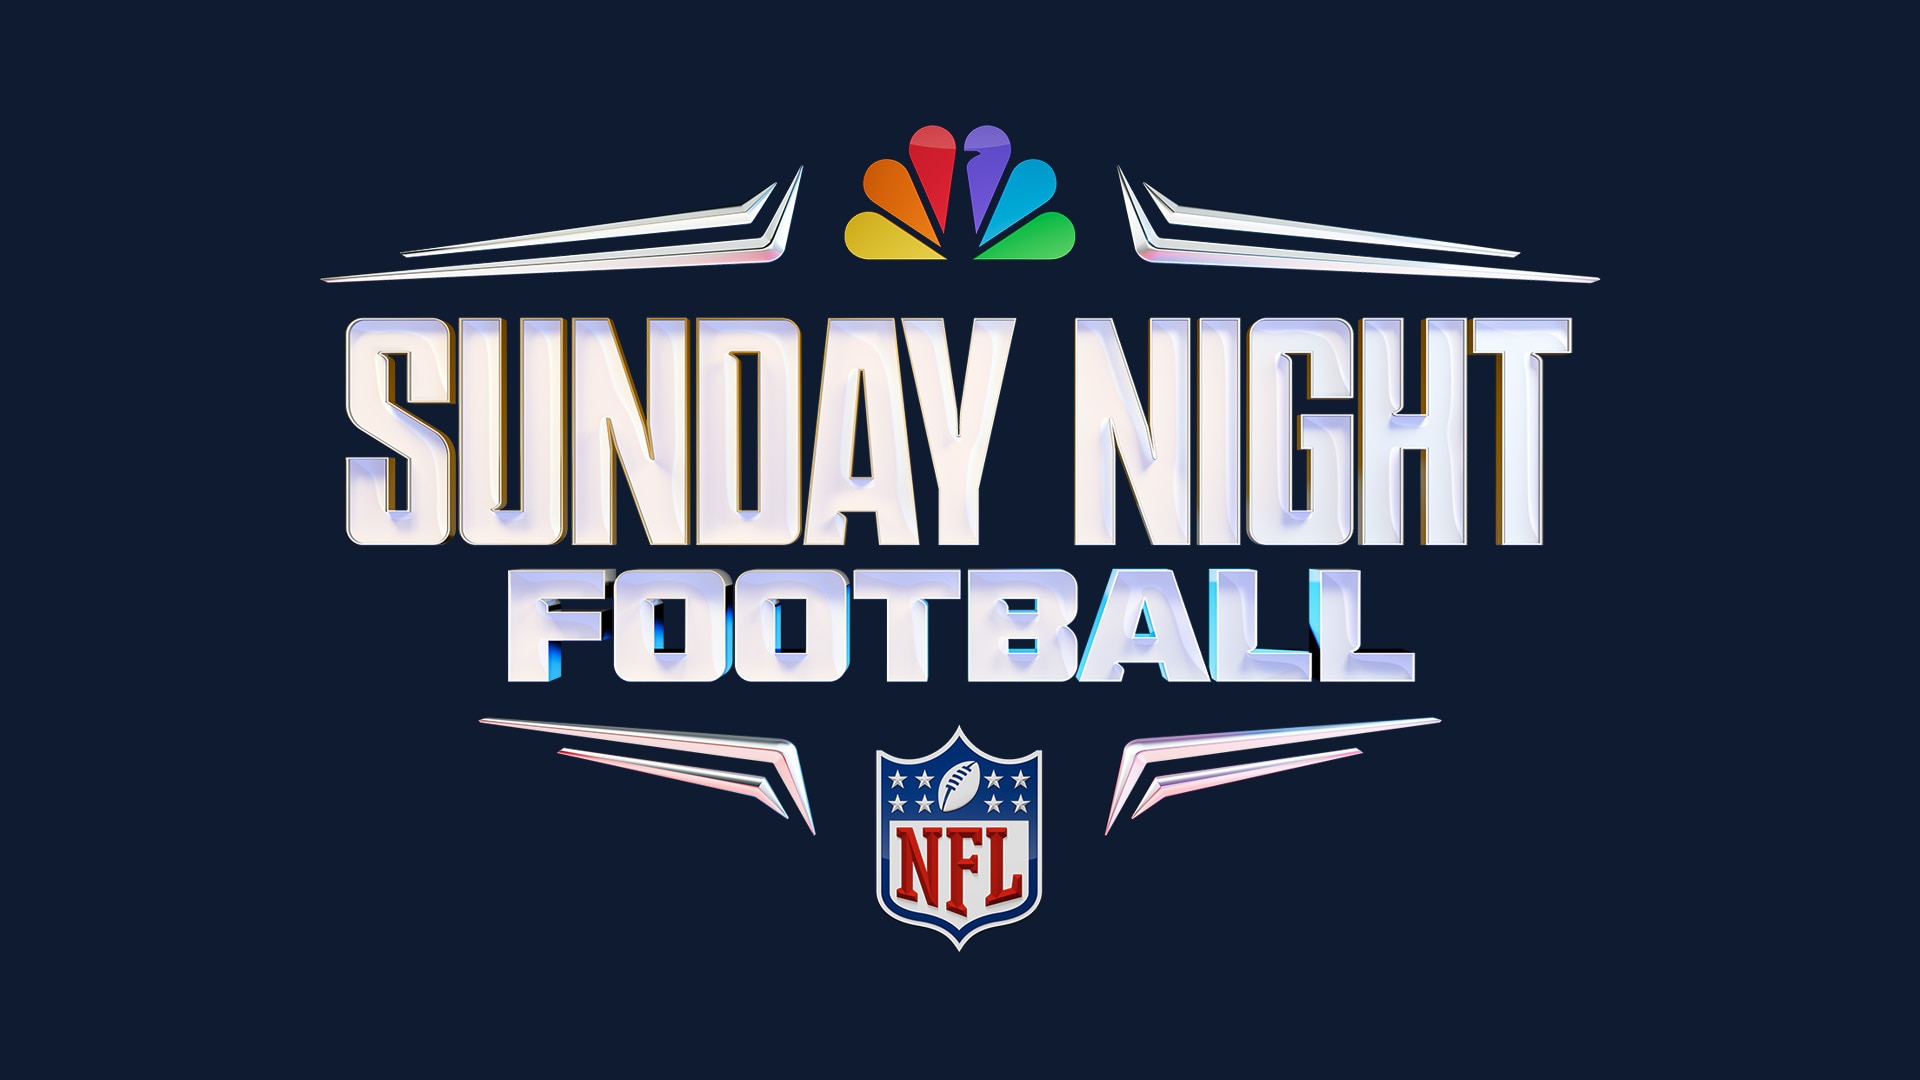 who is playing nfl thursday night football tonight